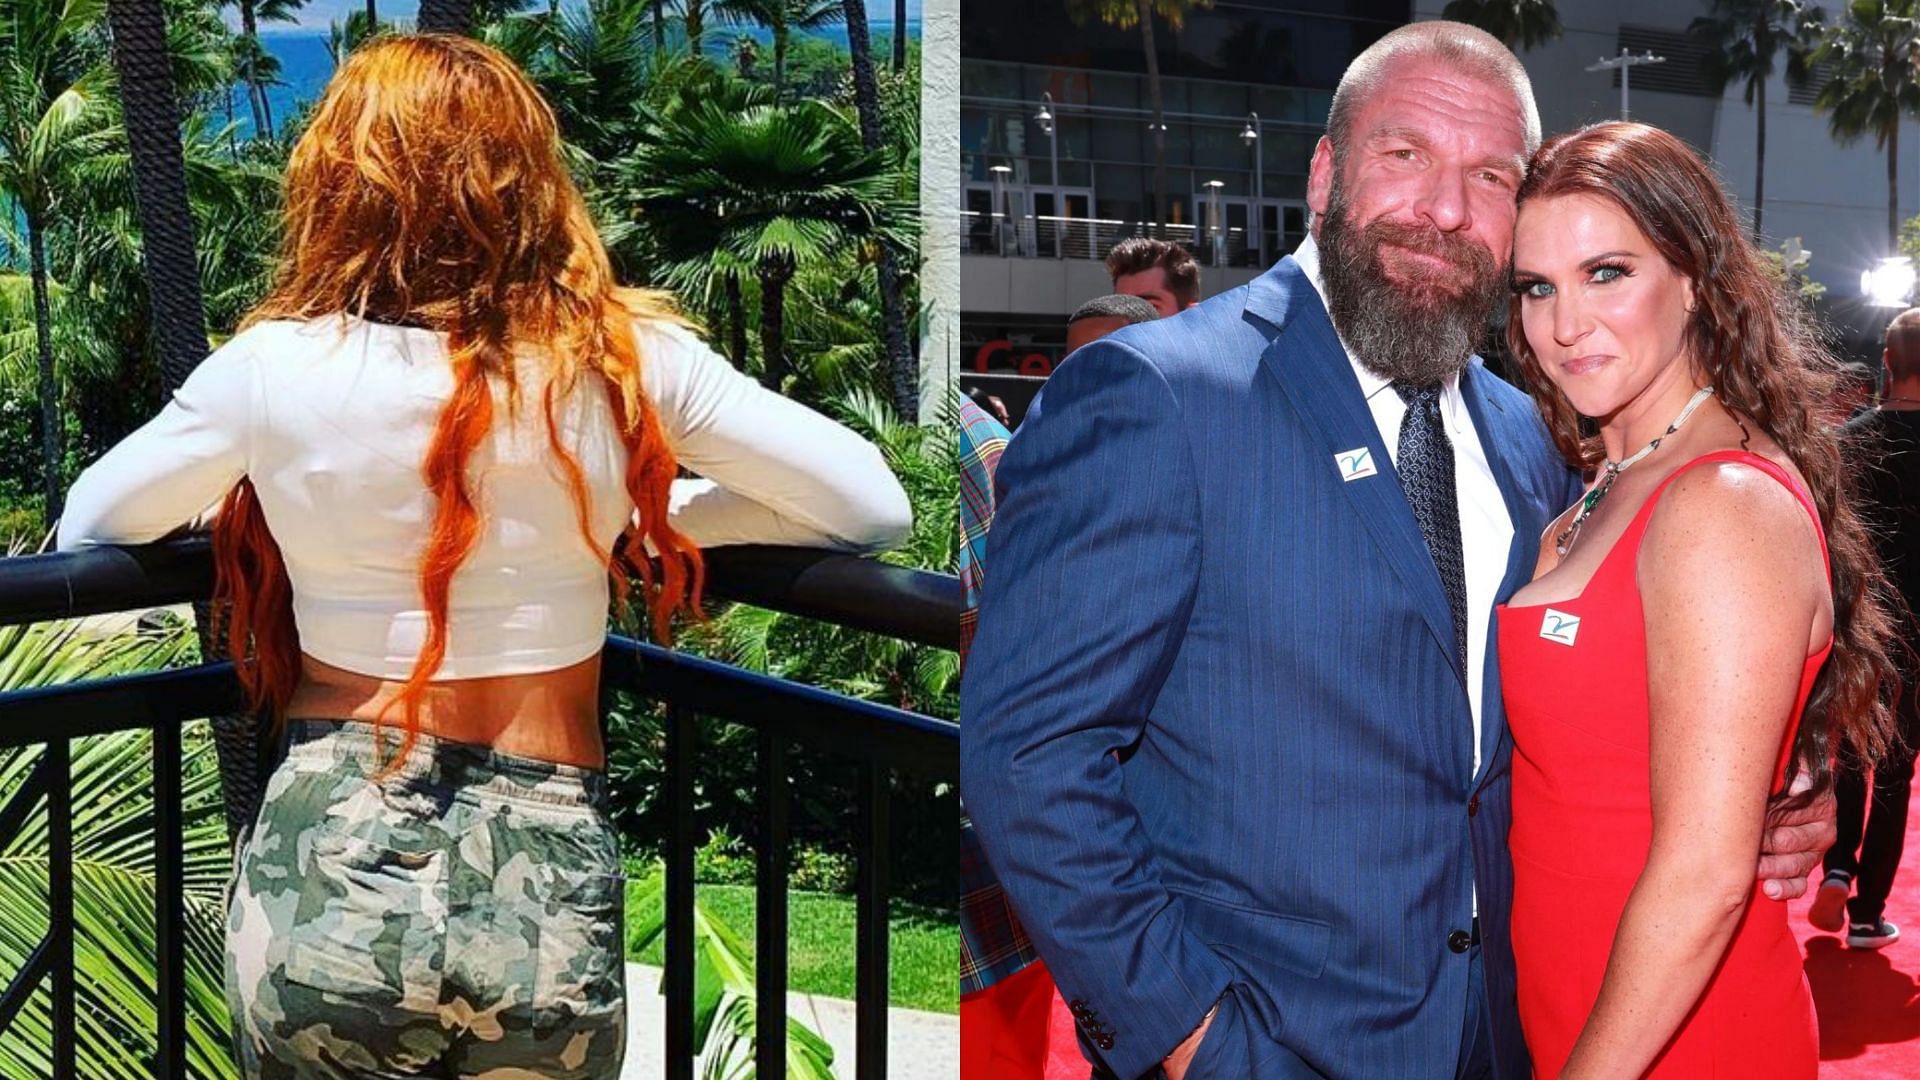 These five WWE Women initially had no plans to date a co-worker but eventually did